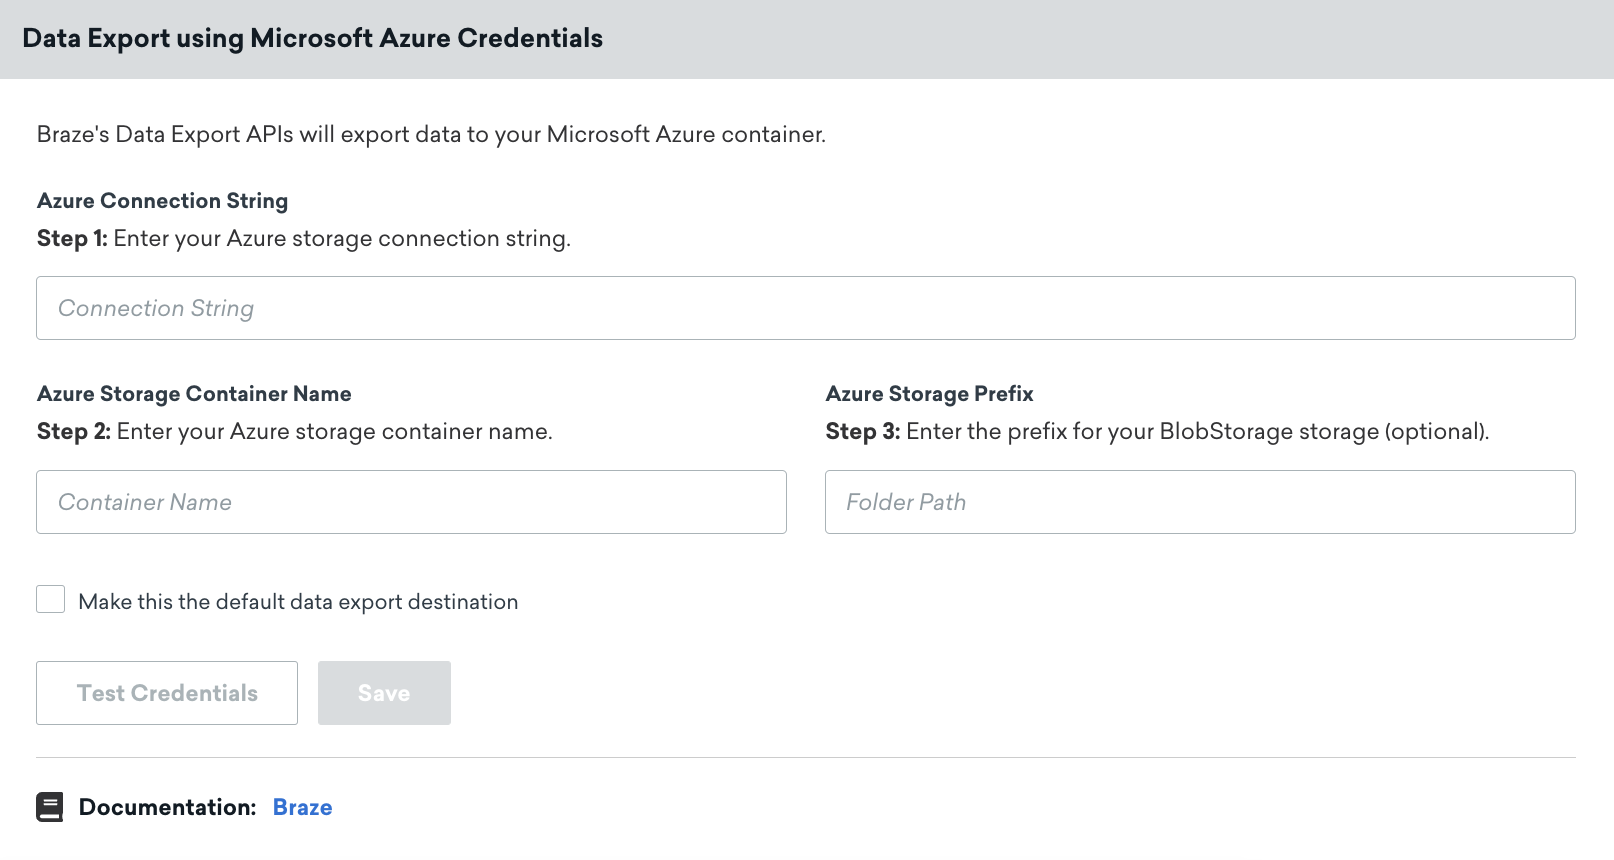 The Microsoft Azure data export page in Braze. On this page exist fields for connection string, container name, and prefix.